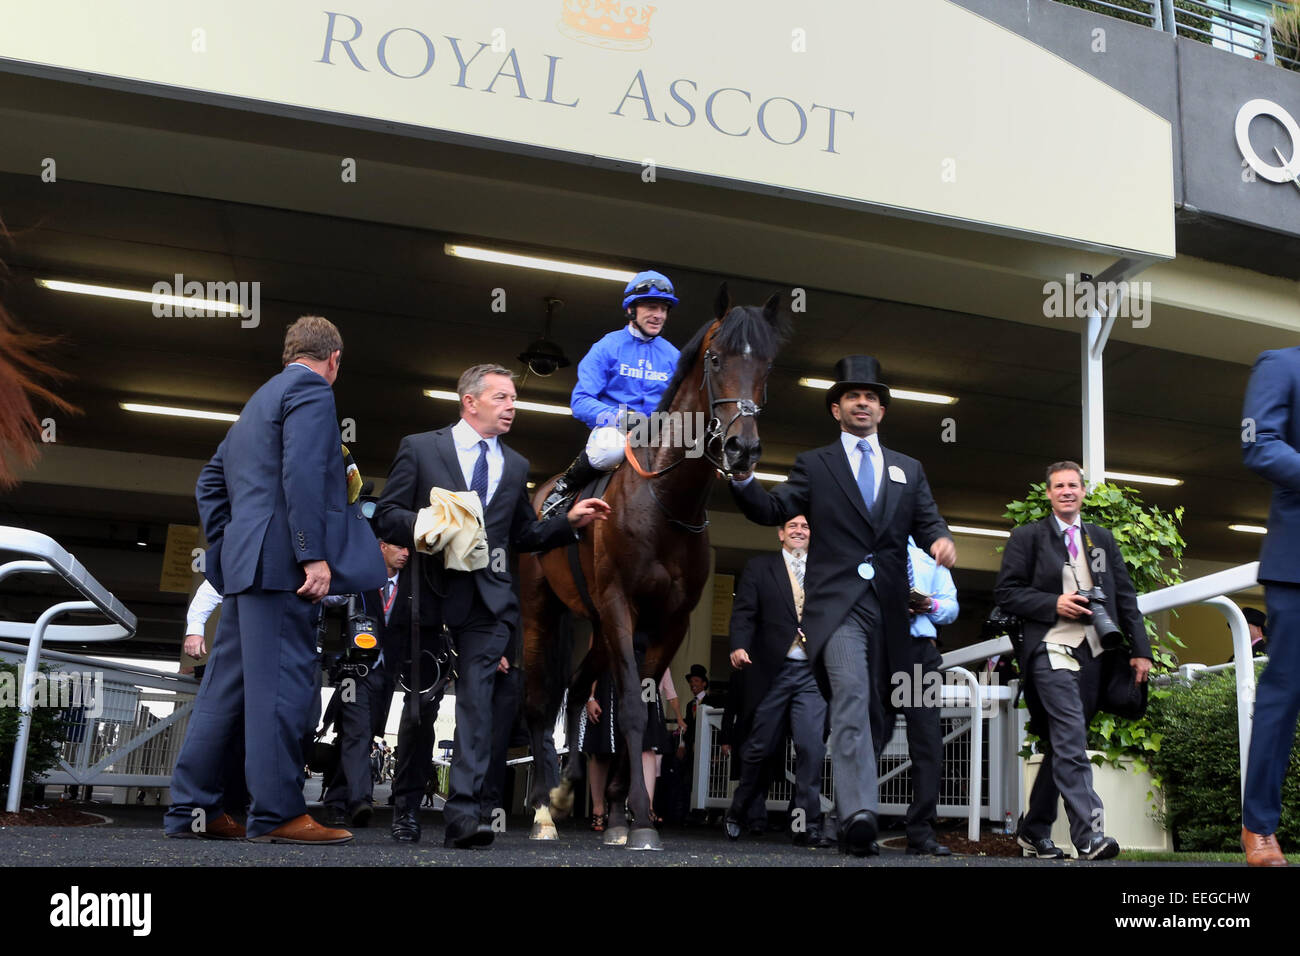 Royal Ascot Elite Army Kieren Fallon with Saeed bin Suroor up and trainer after winning the King George V Stakes Stock Photo